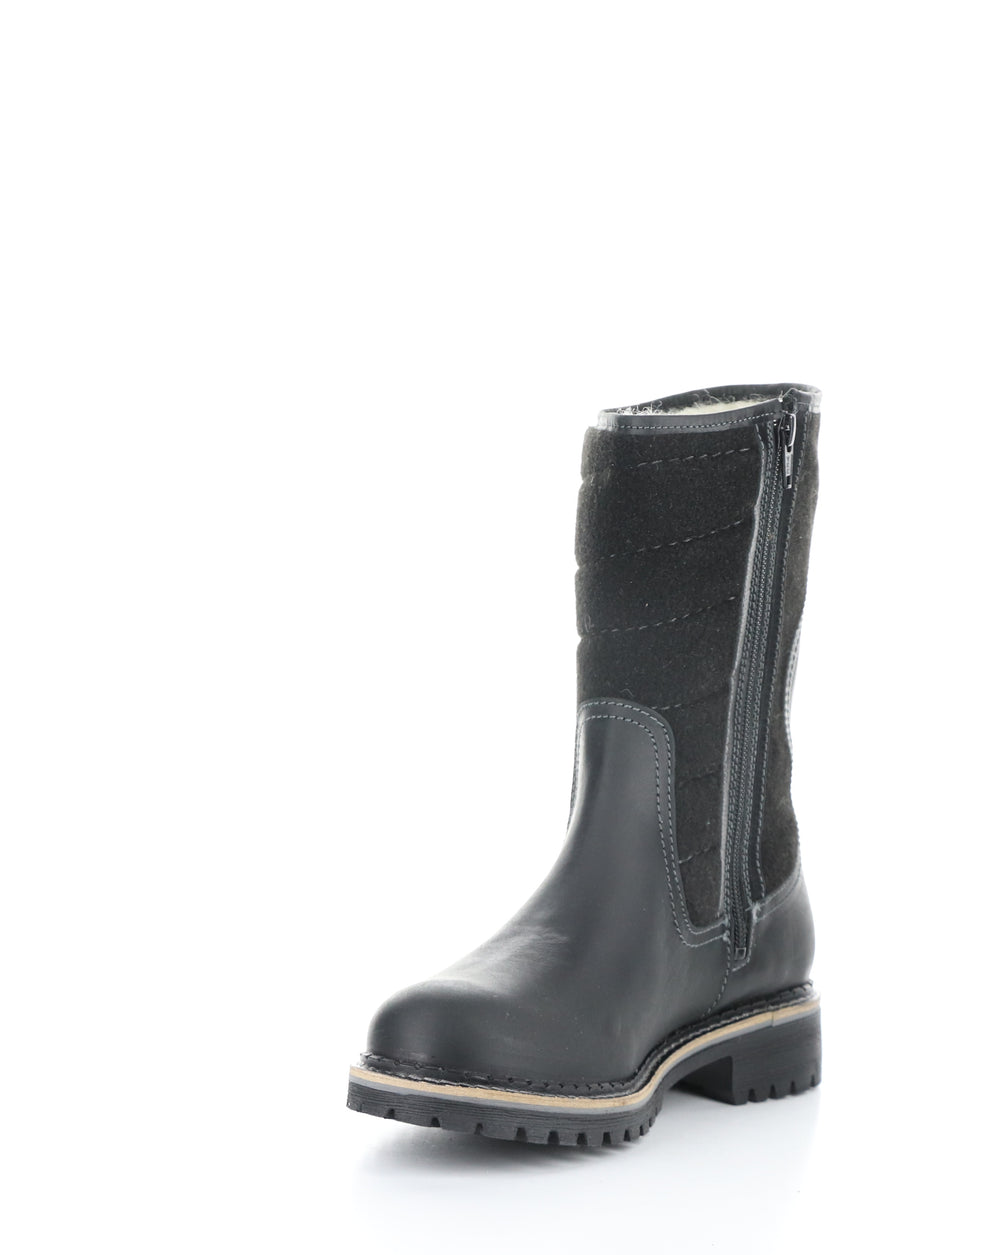 HARLYN BLACK Round Toe Boots